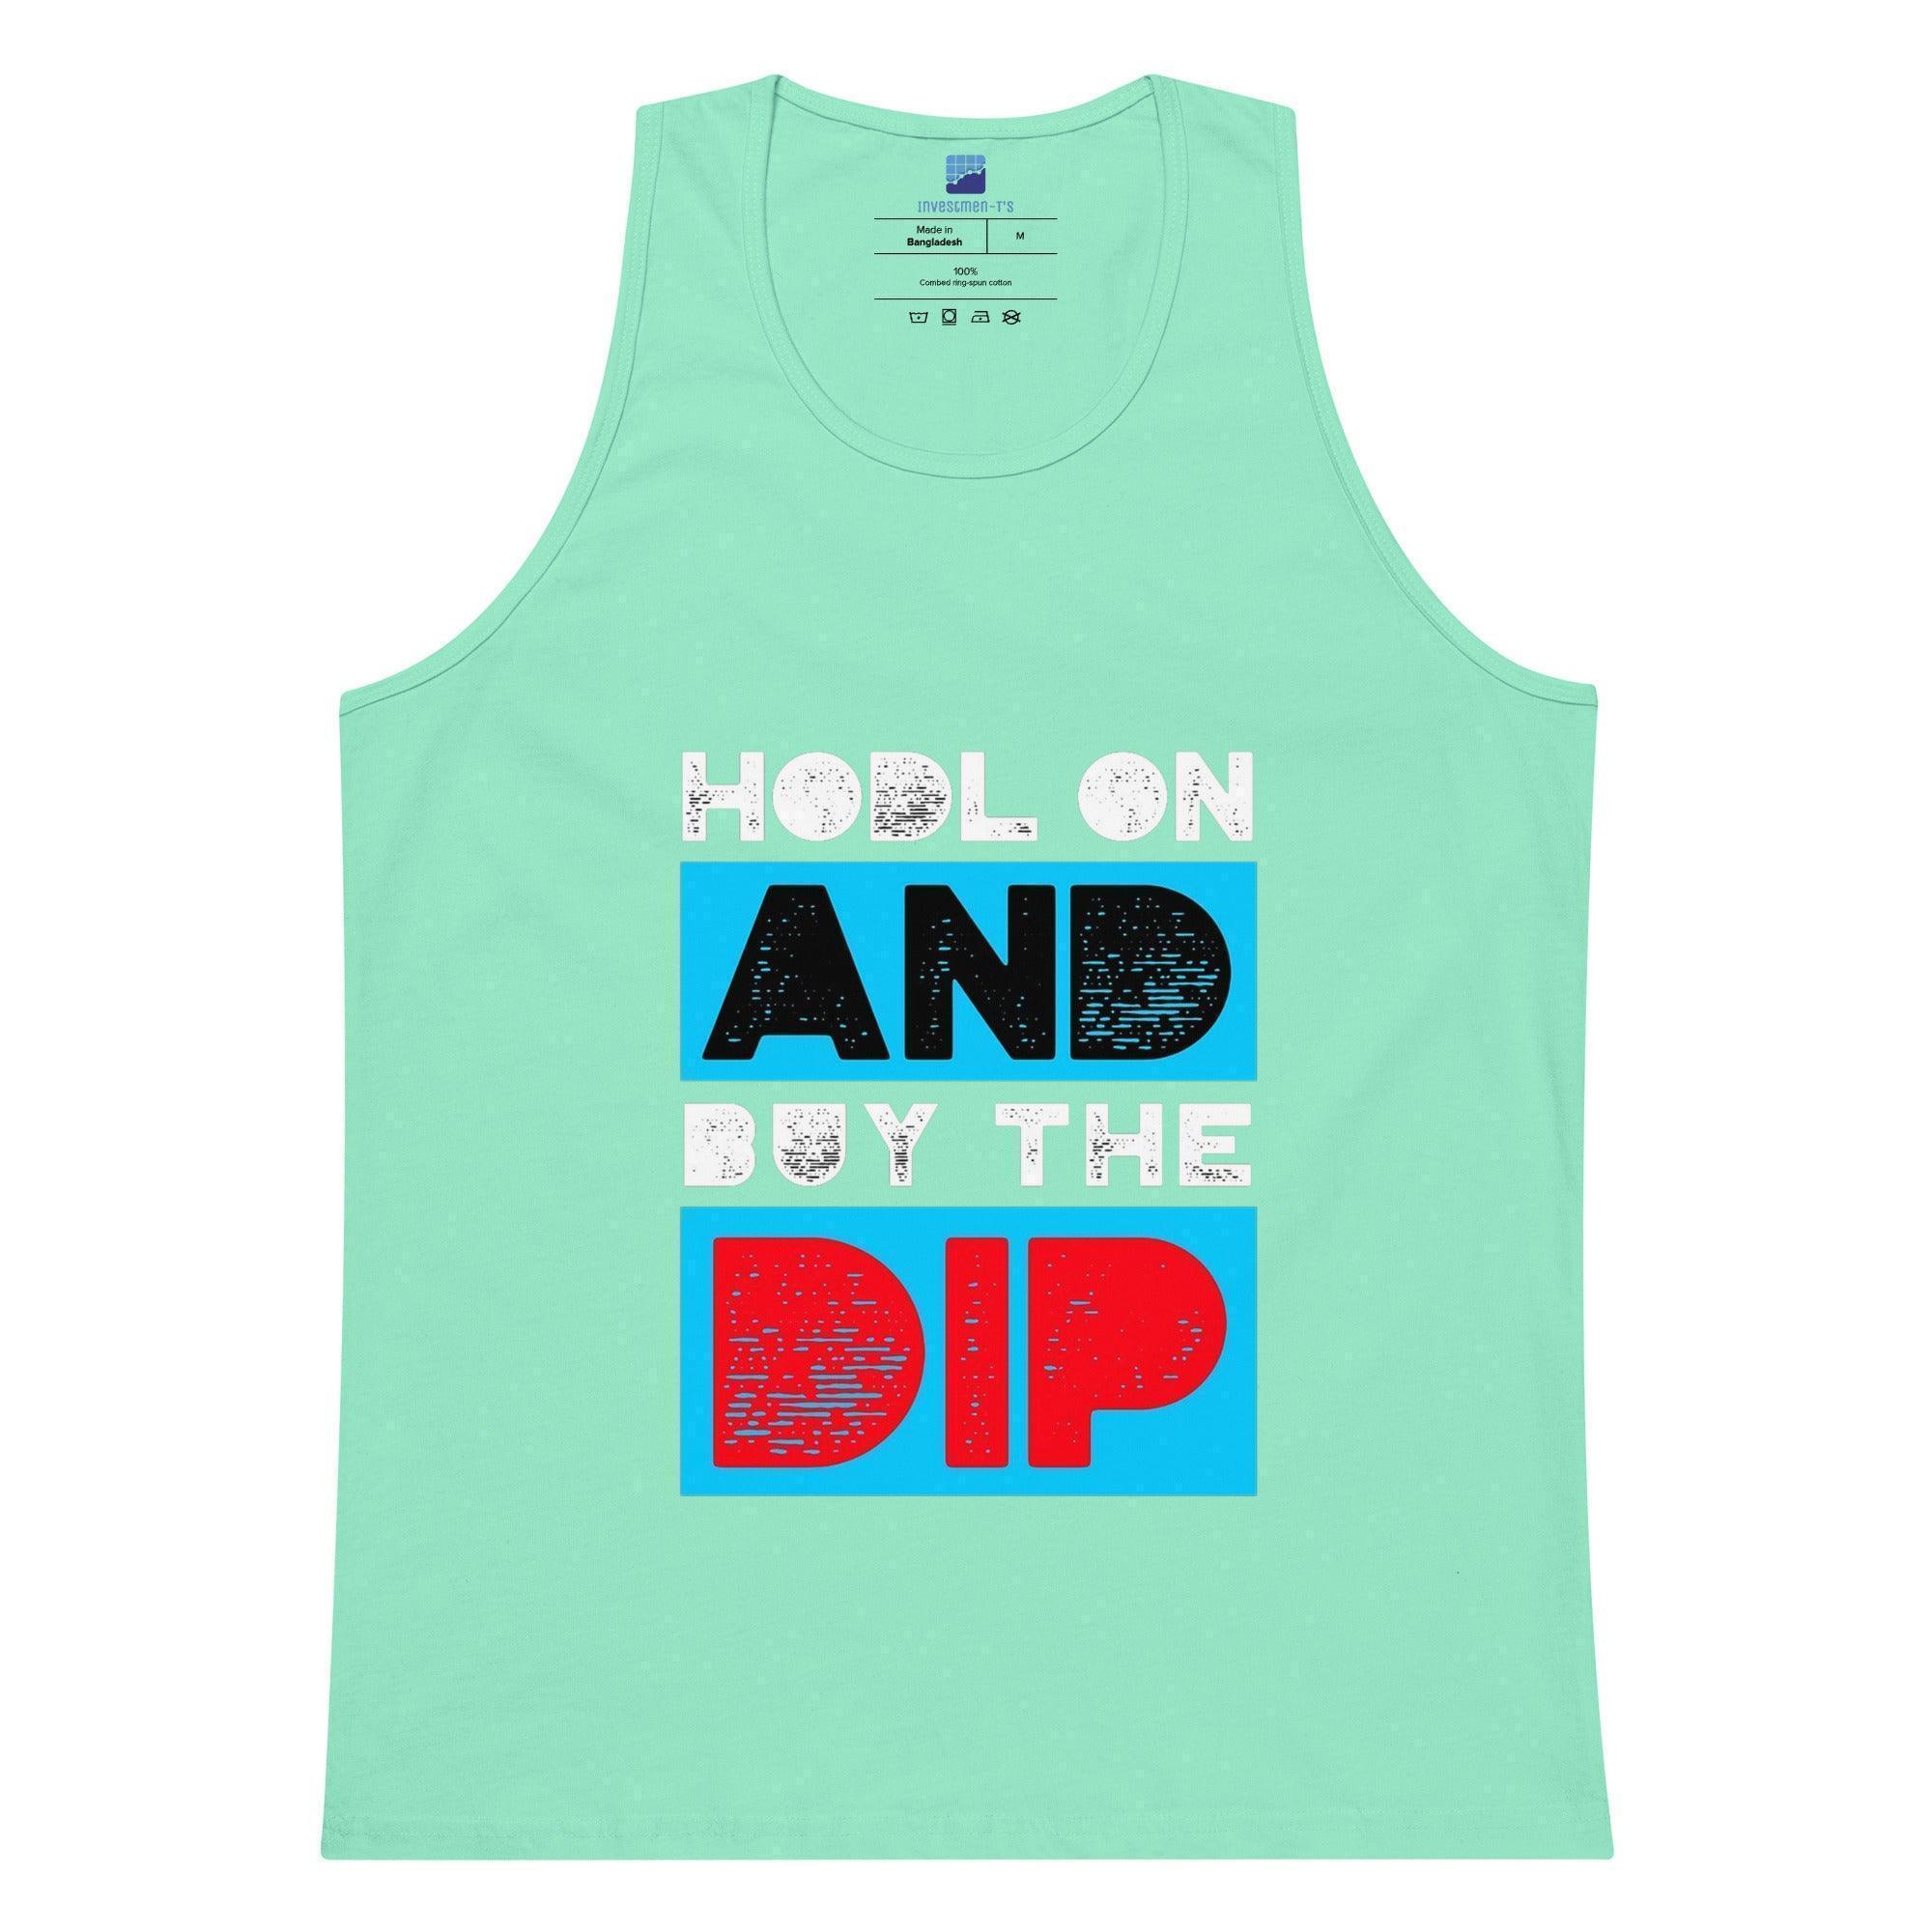 Hodl On & Buy The Dip Tank Top - InvestmenTees